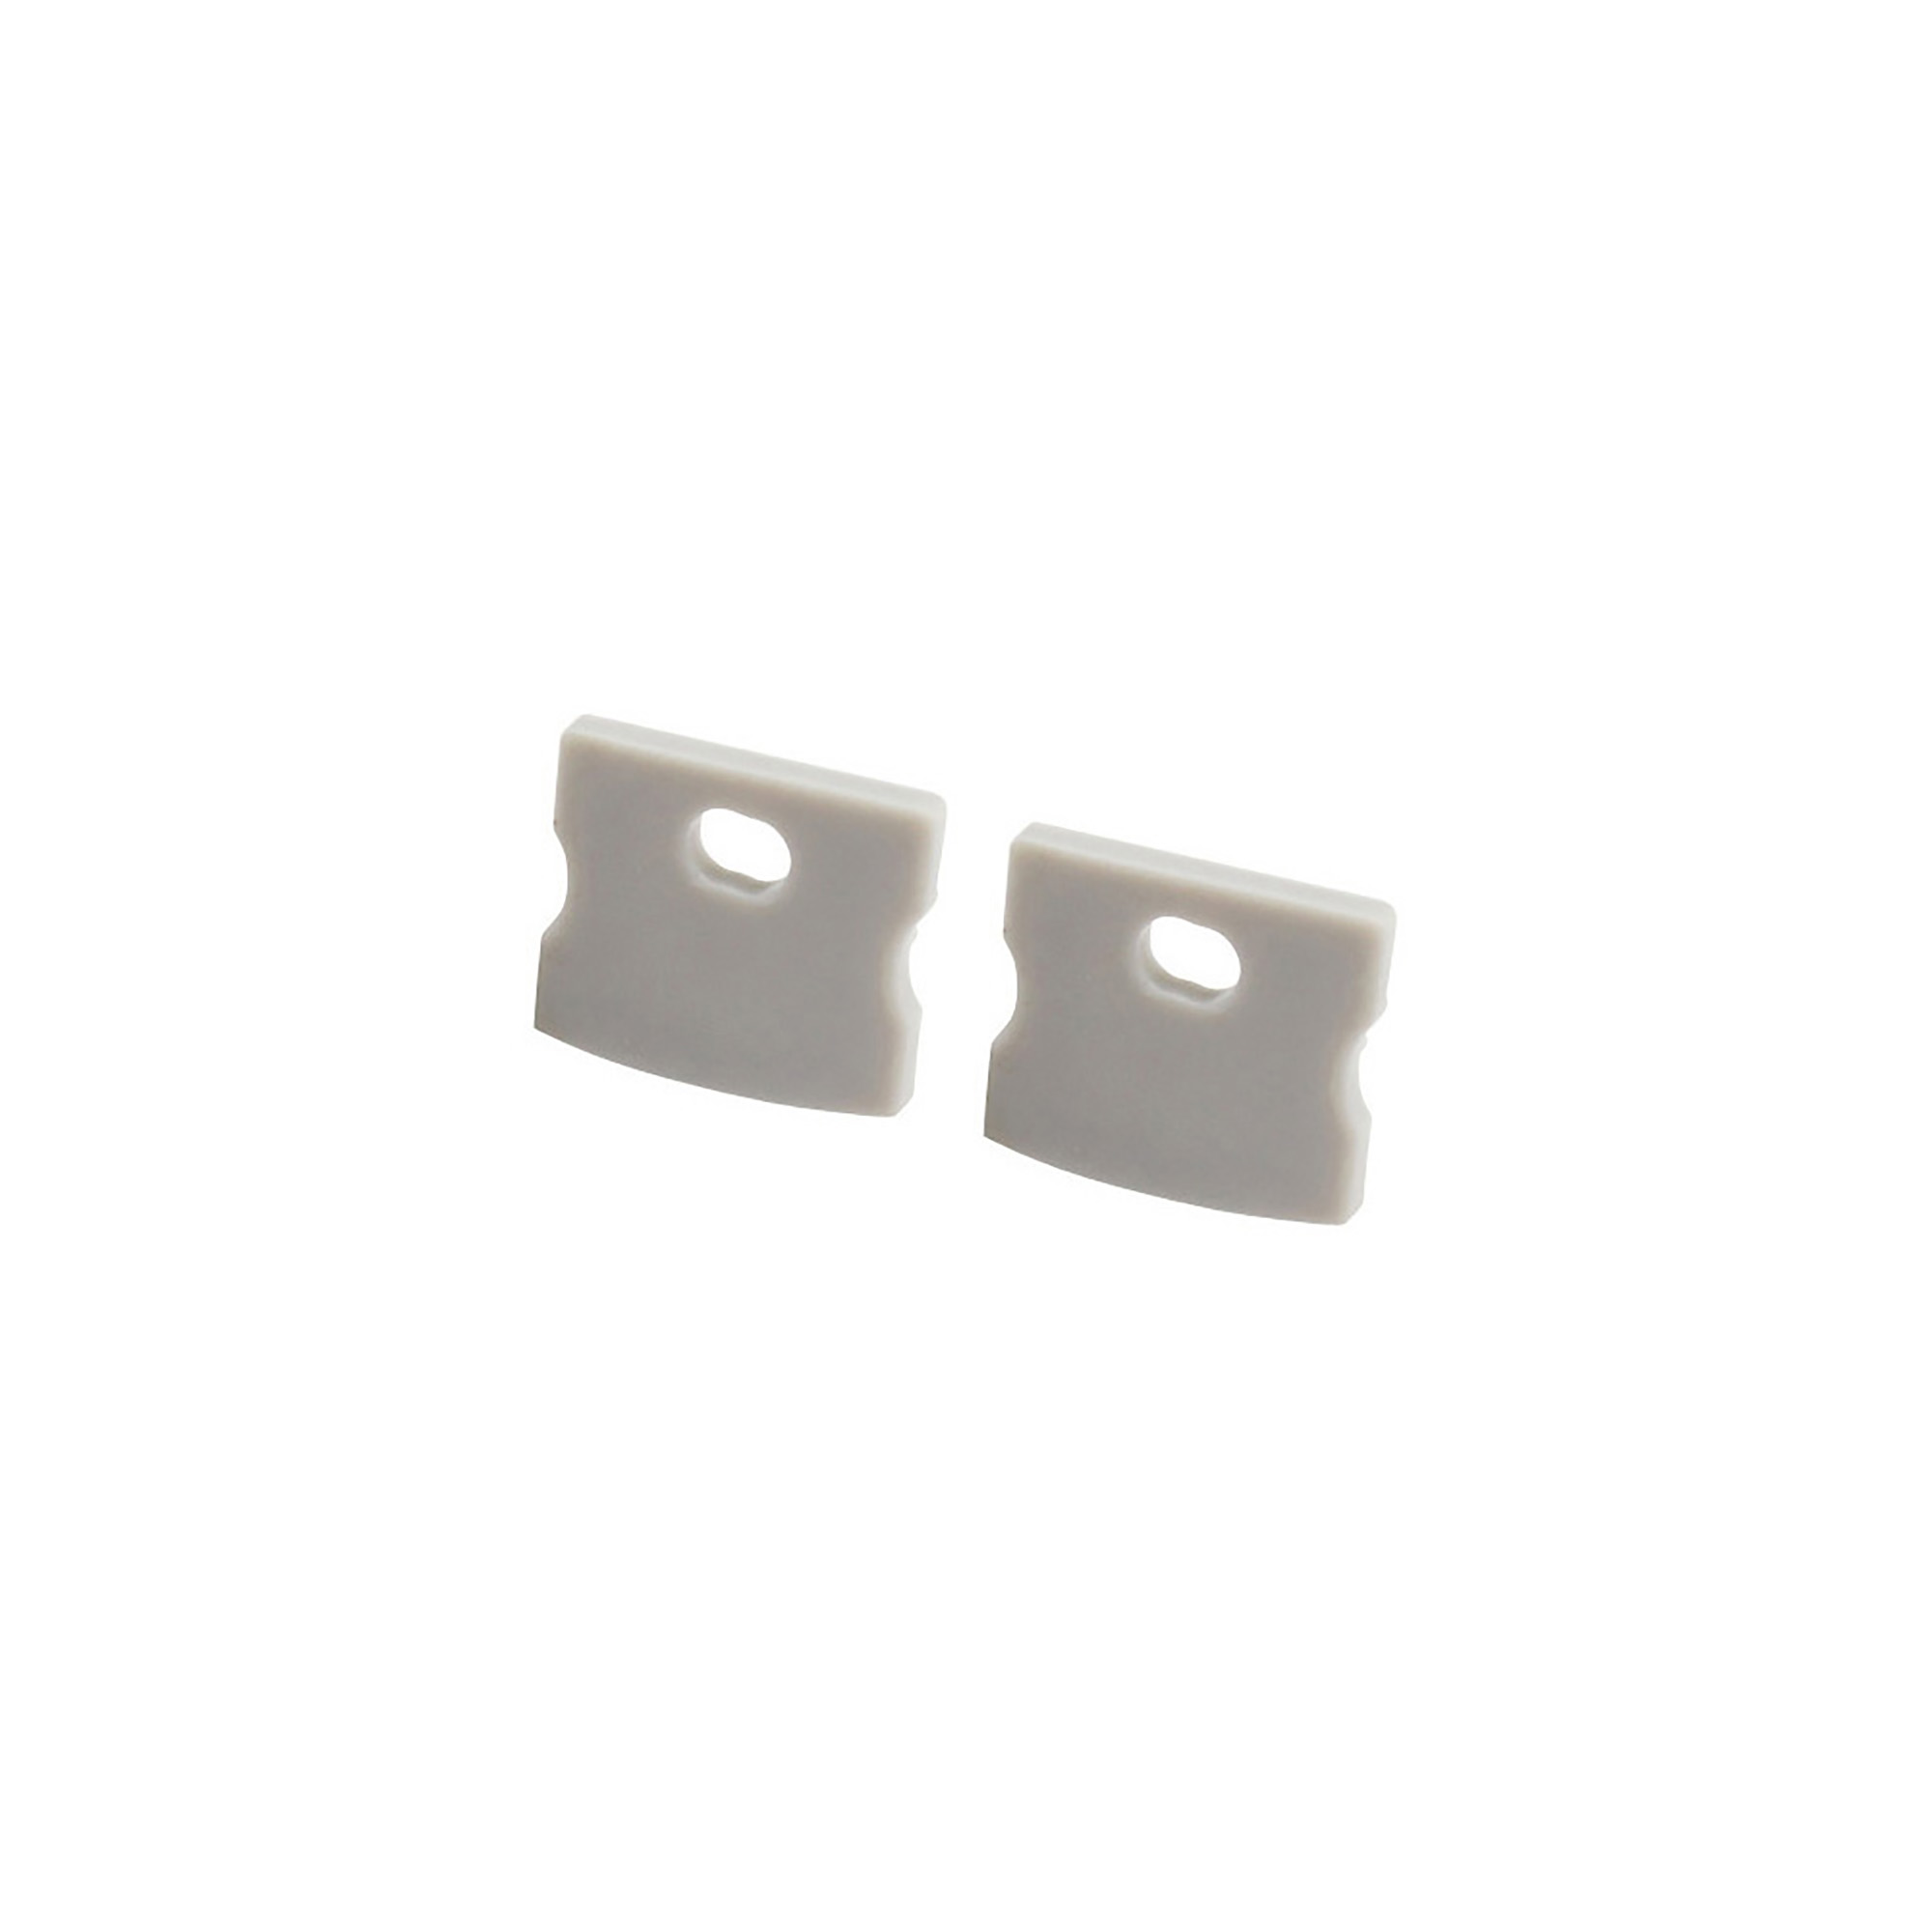 DA930141  Lin 1715; (4 pcs) Endcap With Hole For DA900043 17x15mm Suitable For Cable Entry